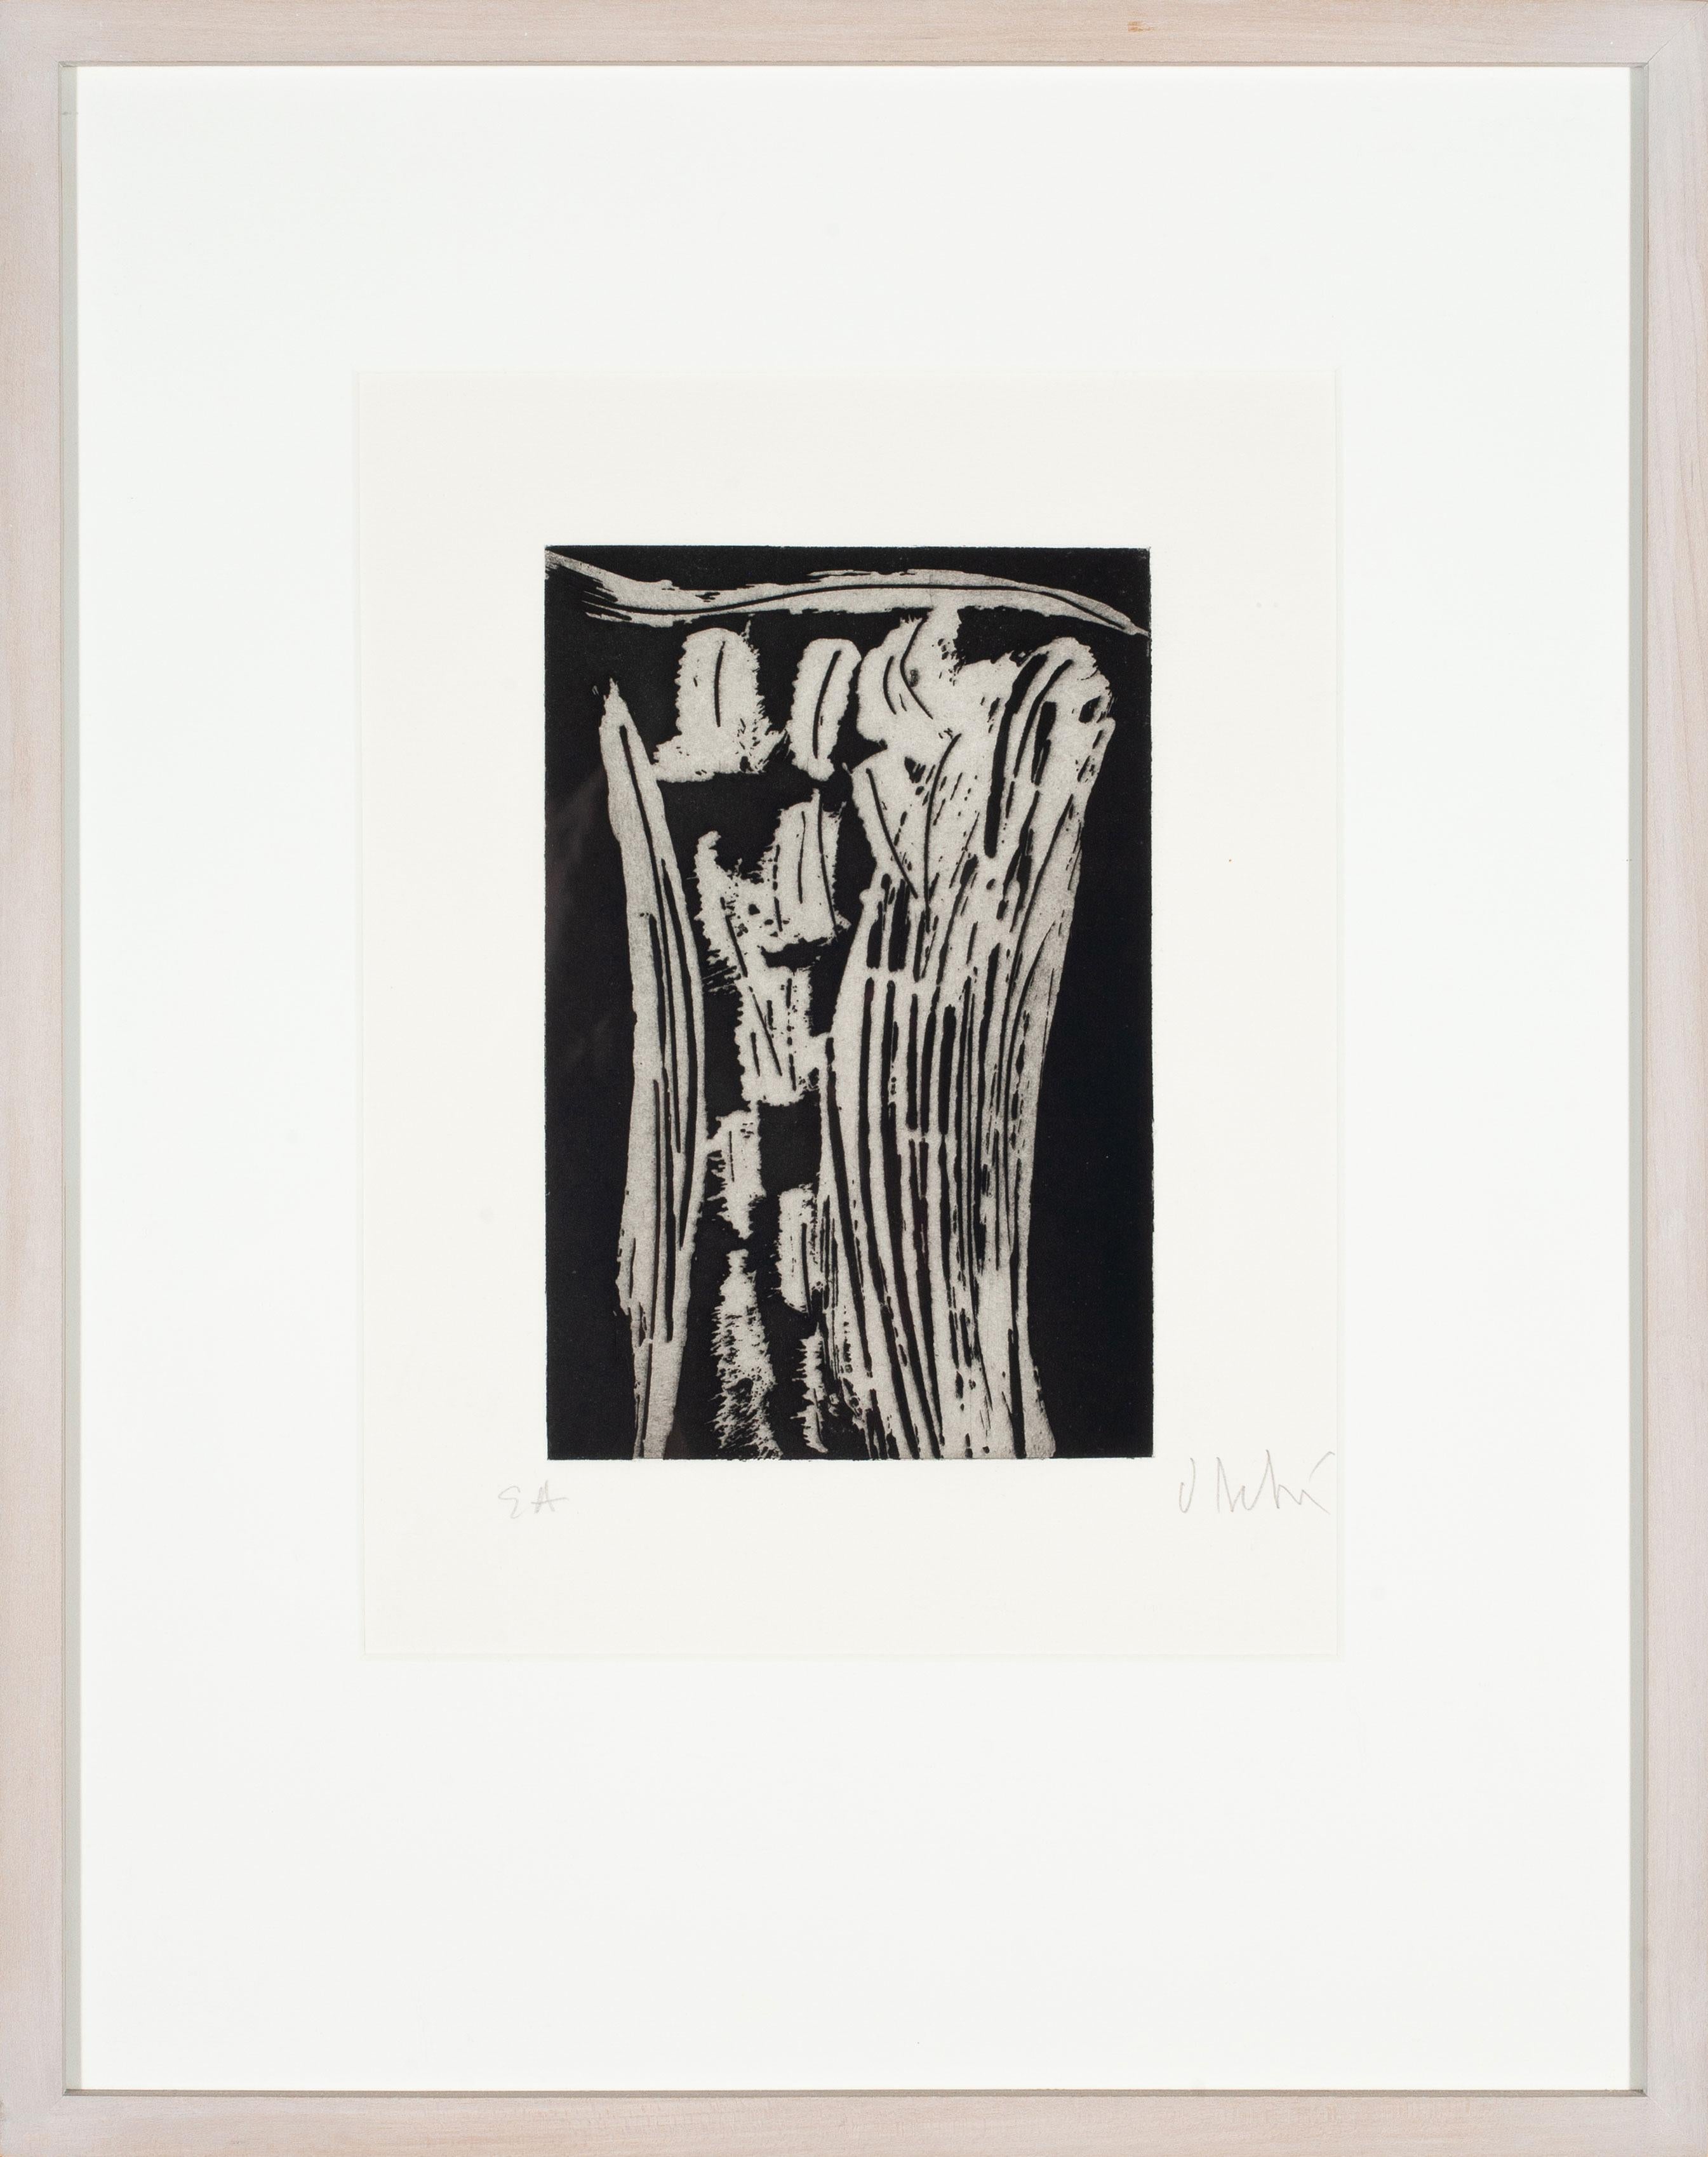 Olivier Debre Abstract Print - Signe personnage